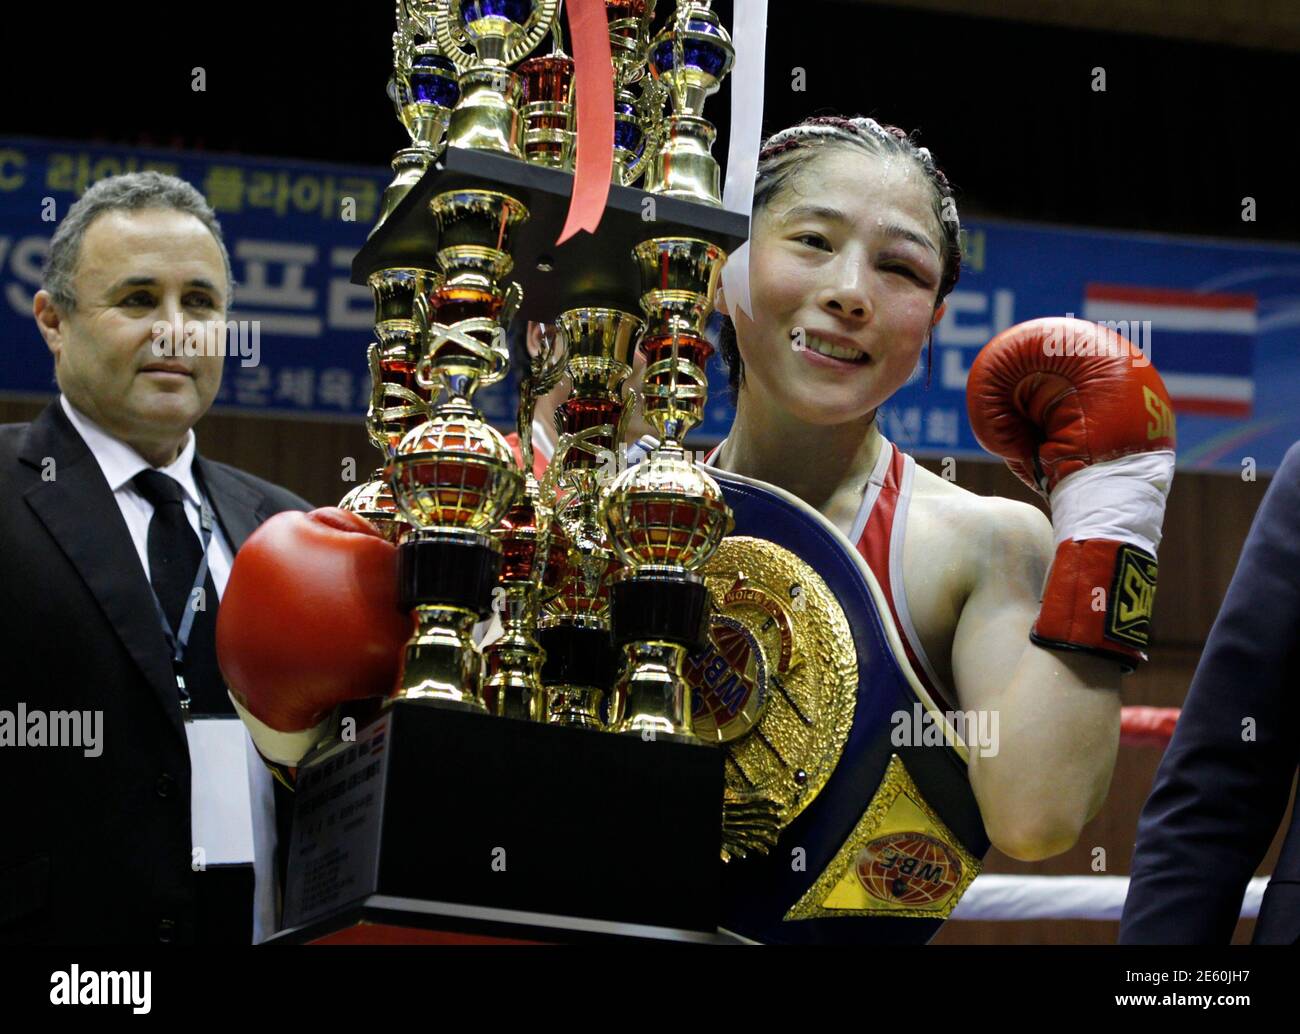 Kim Ju-hee of South Korea, holding a trophy and wearing five champion belts, celebrates her victory against Fahpratan Looksaikongdin of Thailand after their 10-round bout five women's world light flyweight titles